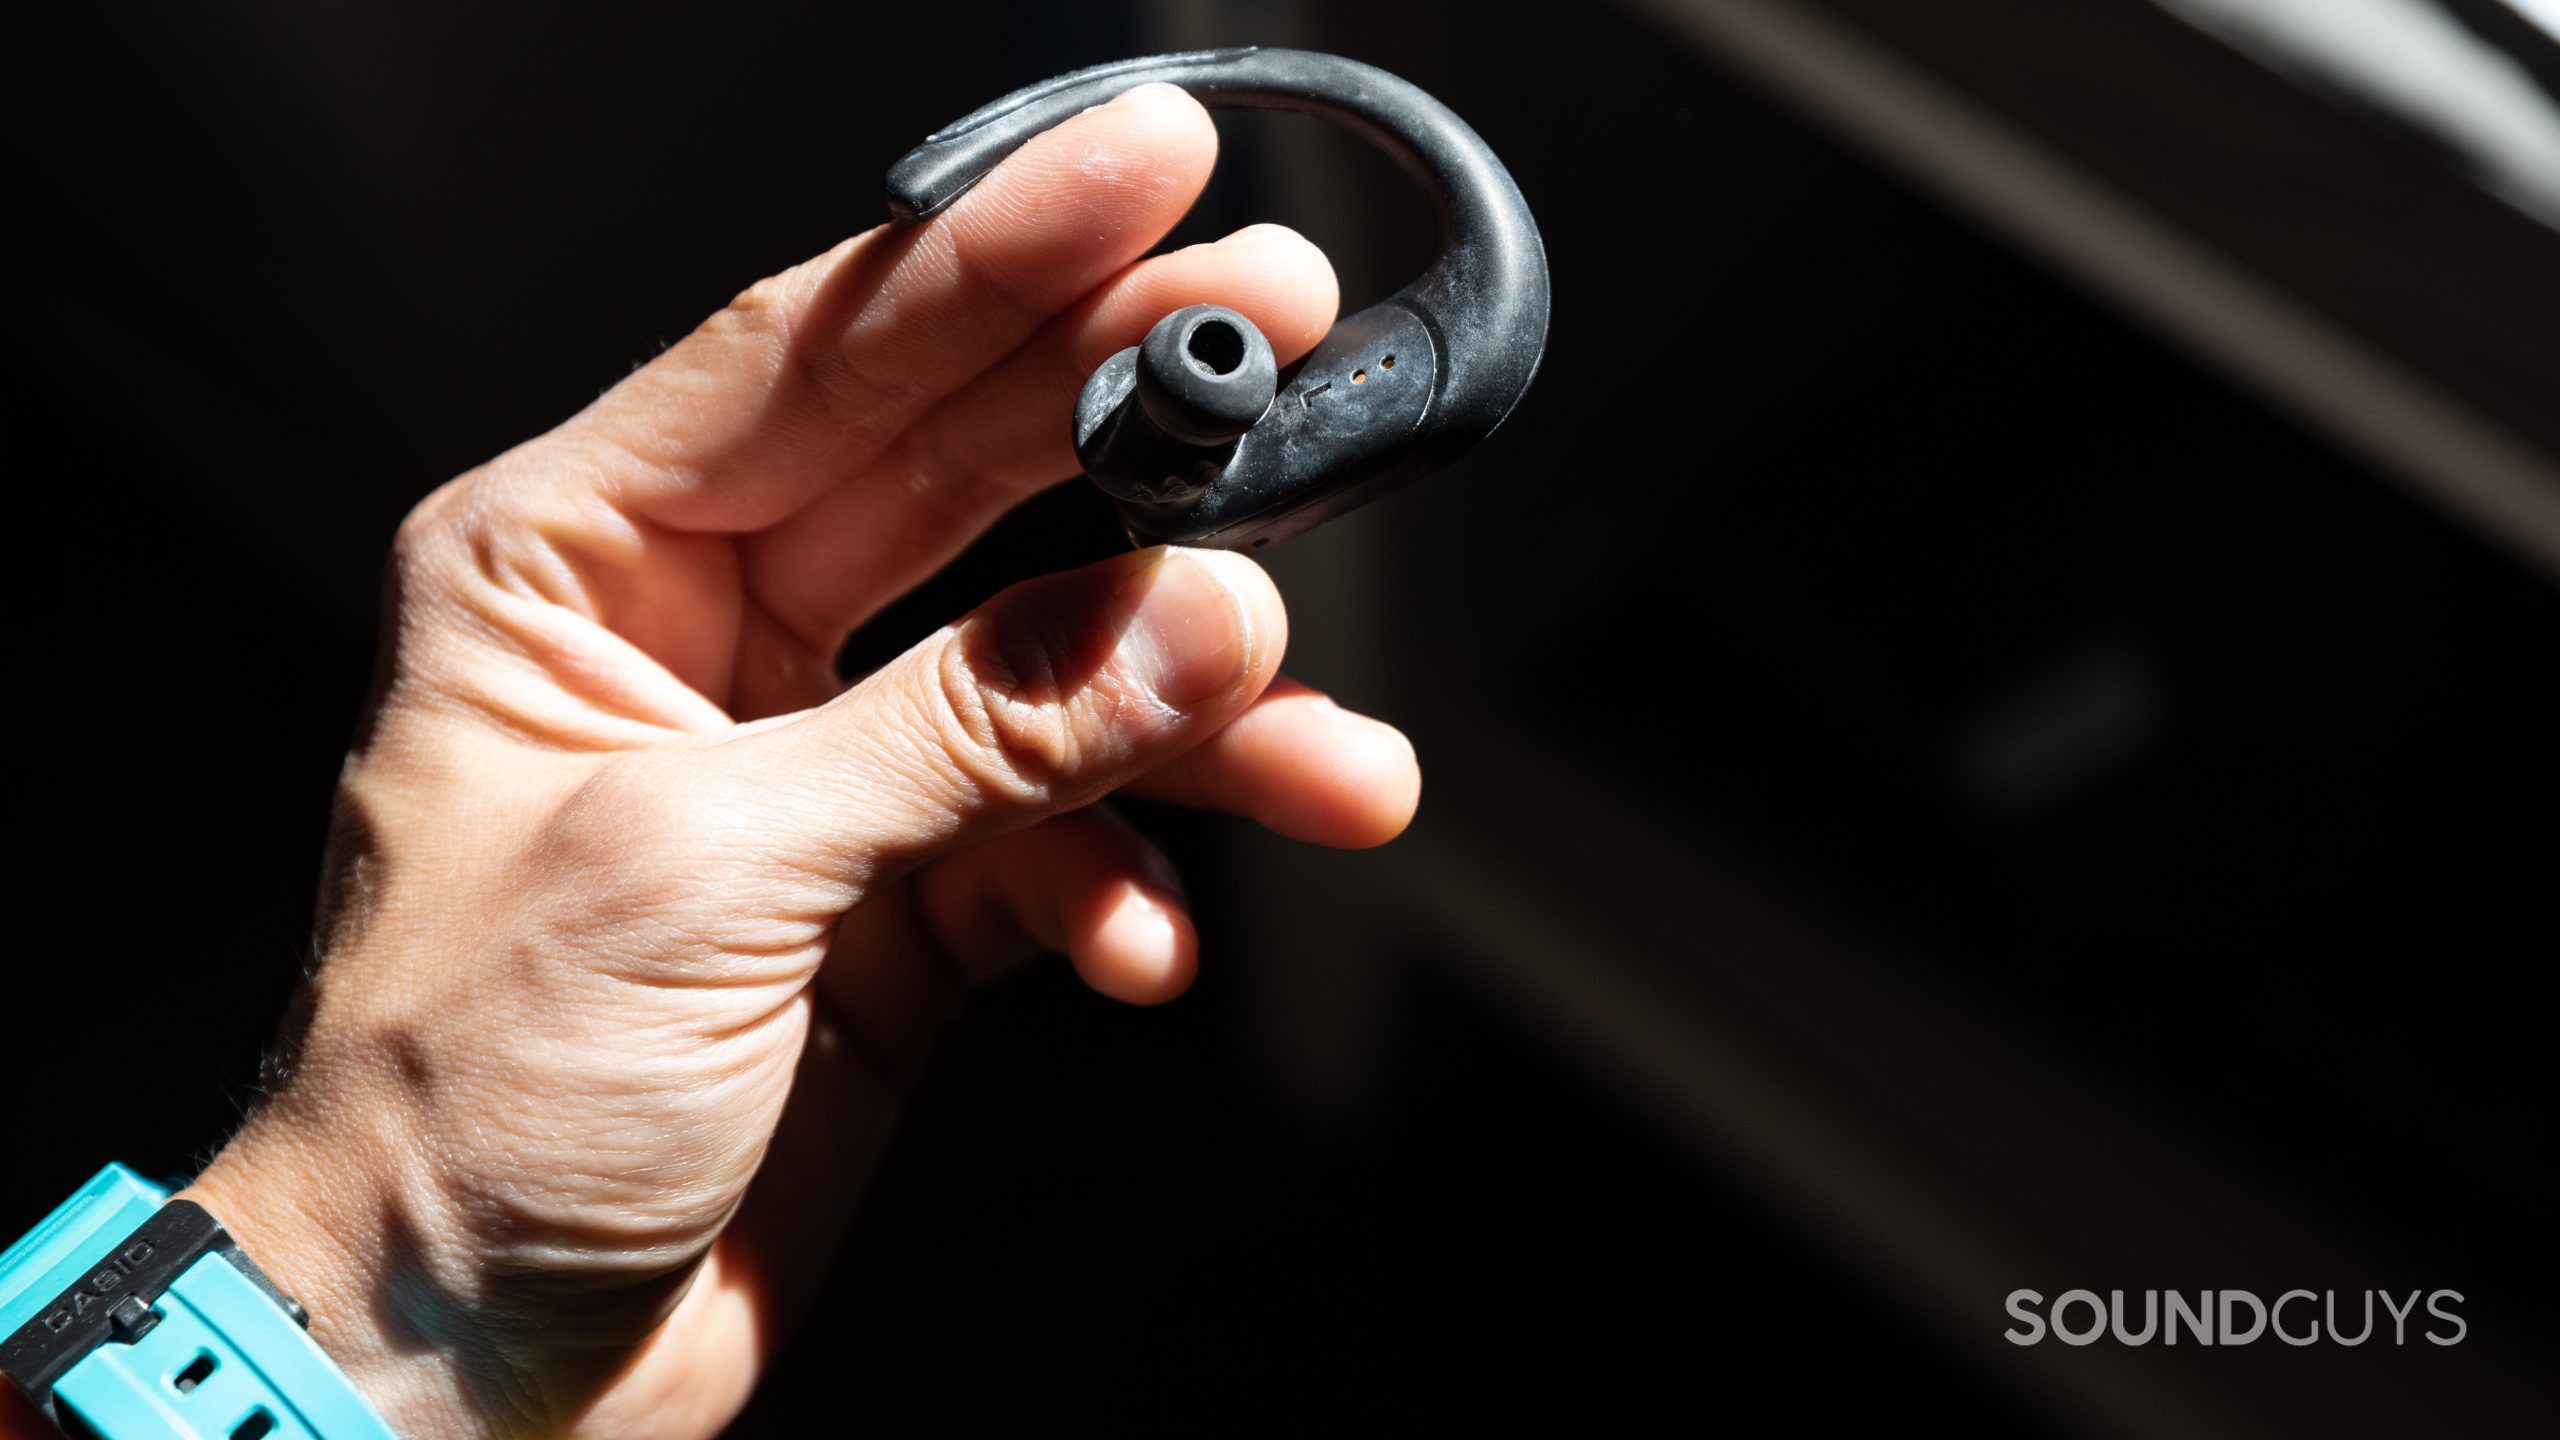 A hand holds the JBL ENDURANCE PEAK II true wireless workout earbud by the powerhook, which powers the earbuds on and off.